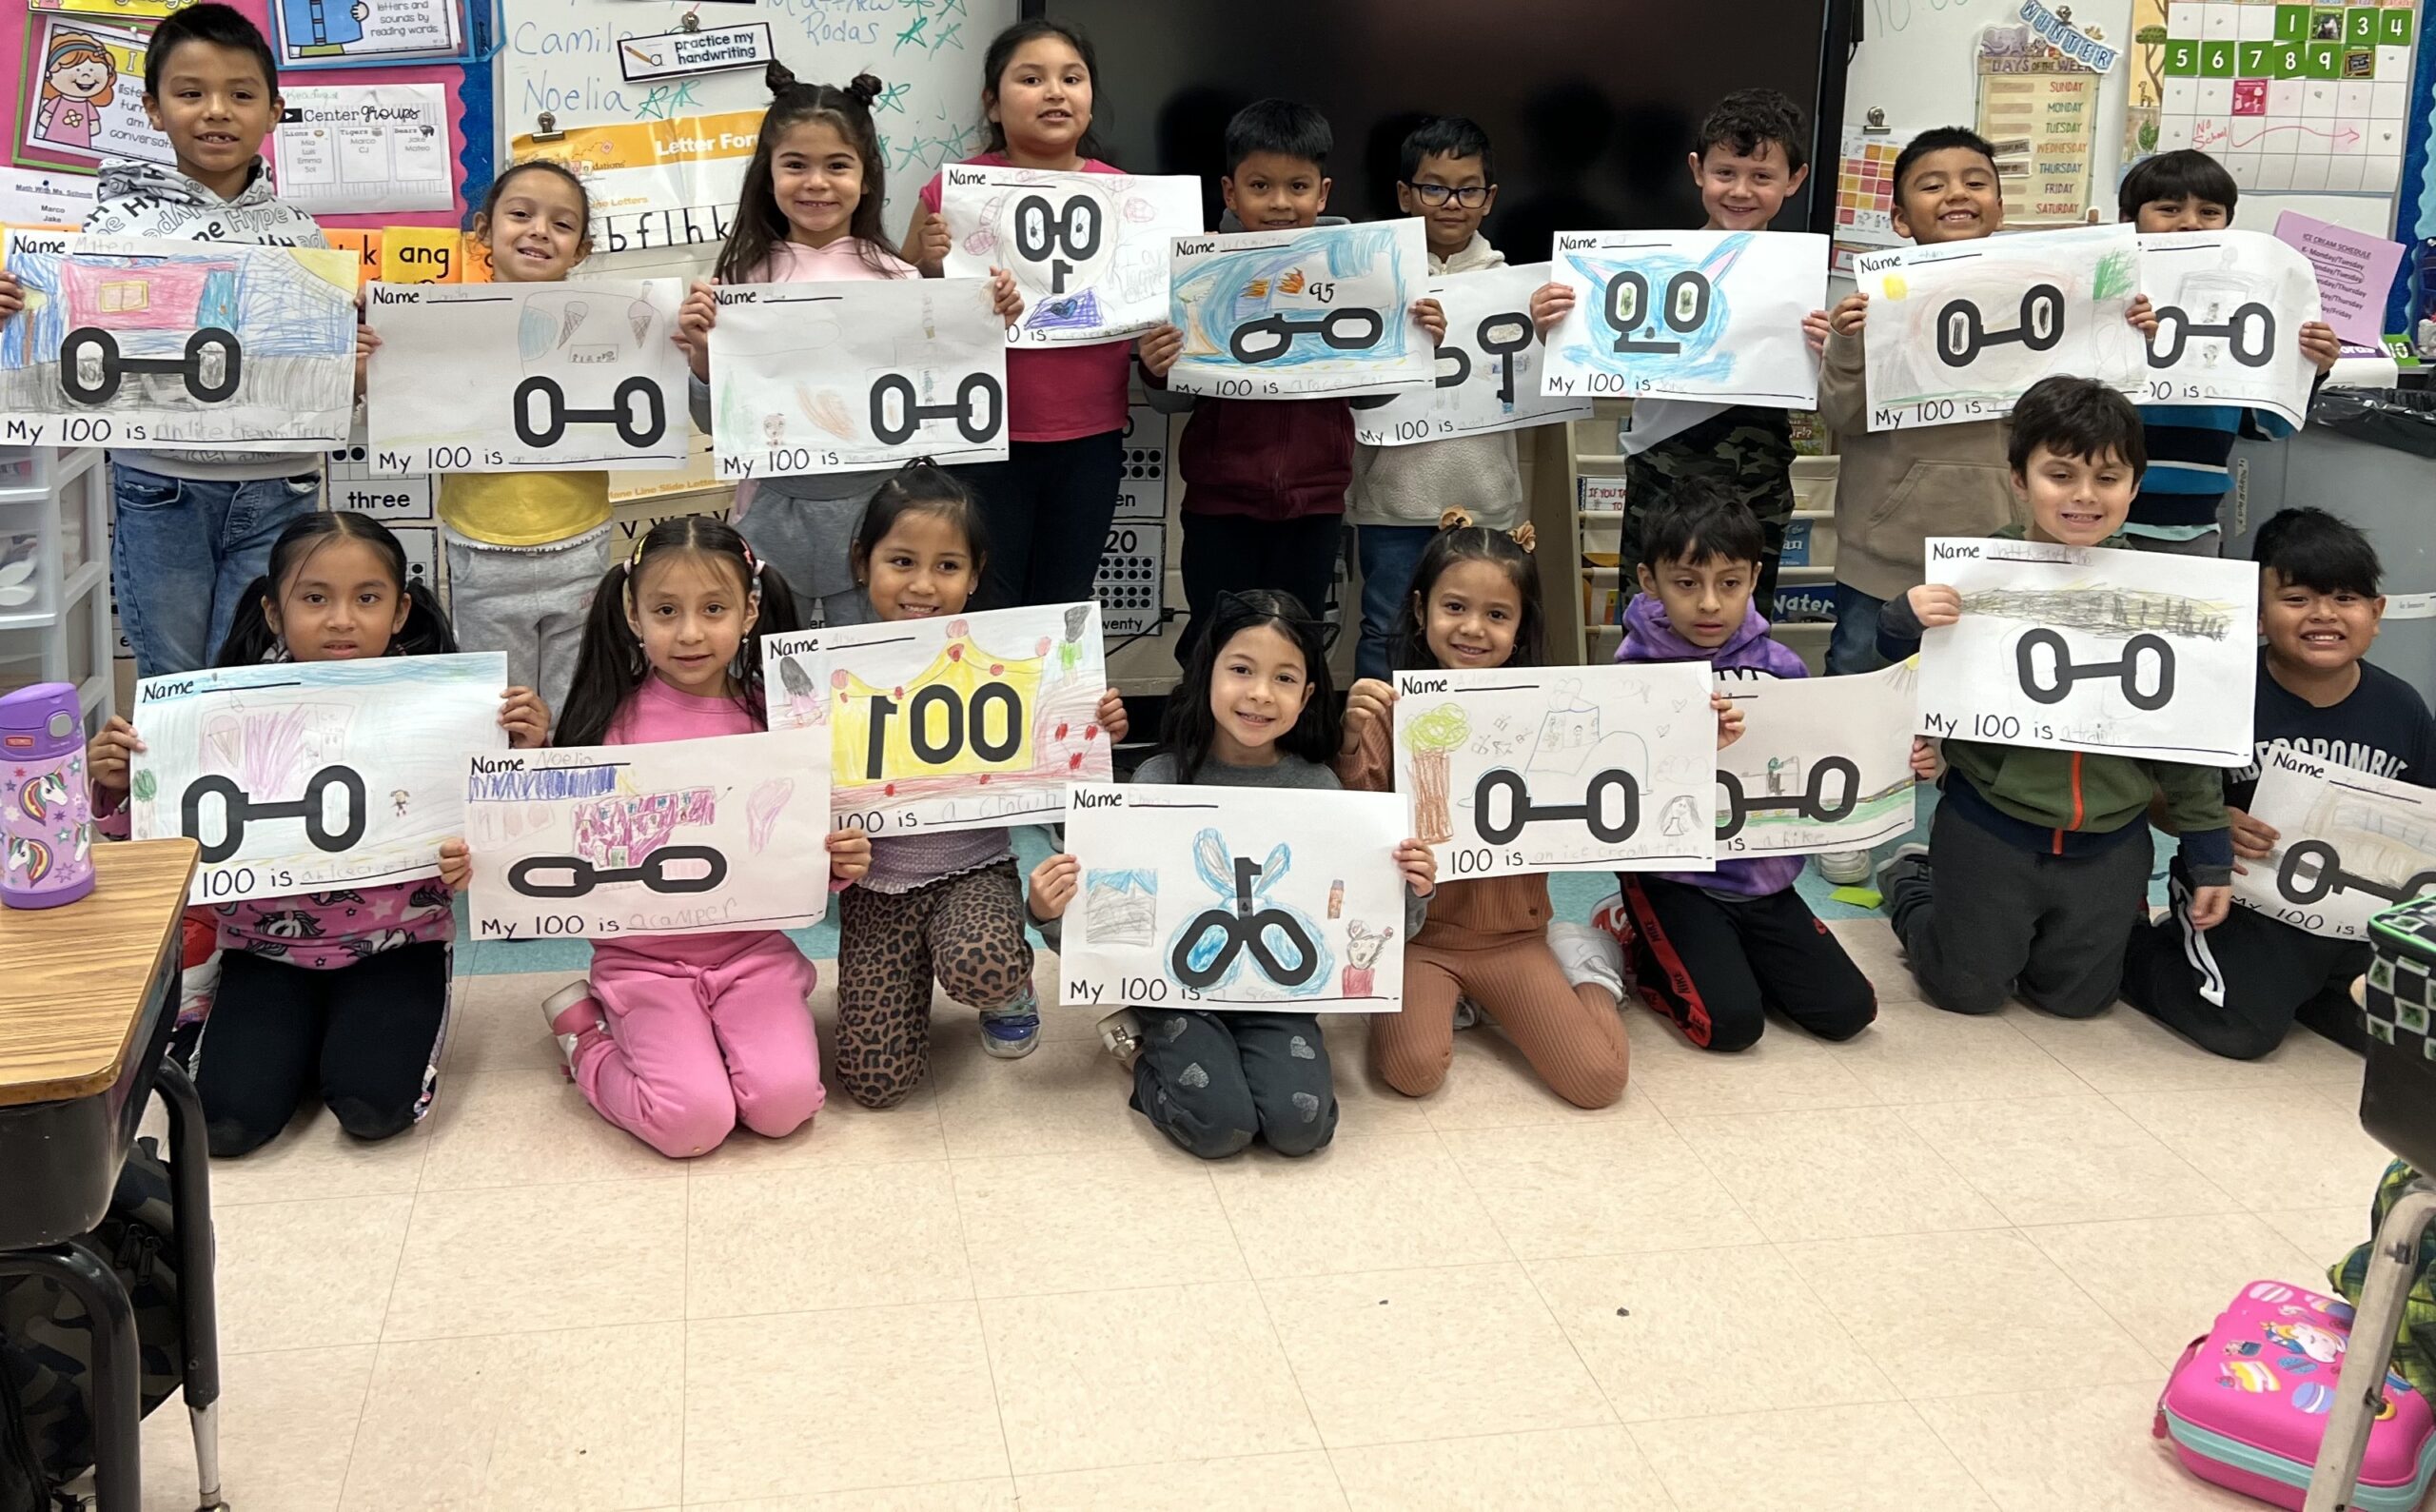 Students at Hampton Bays Elementary School recently celebrated the completion of the first 100 days of school with a variety of activities. They dressed up as 100-year-olds, participated in counting lessons, created 100th day of school
projects and read books about the 100th day of school. COURTESY HAMPTON BAYS SCHOOL DISTRICT